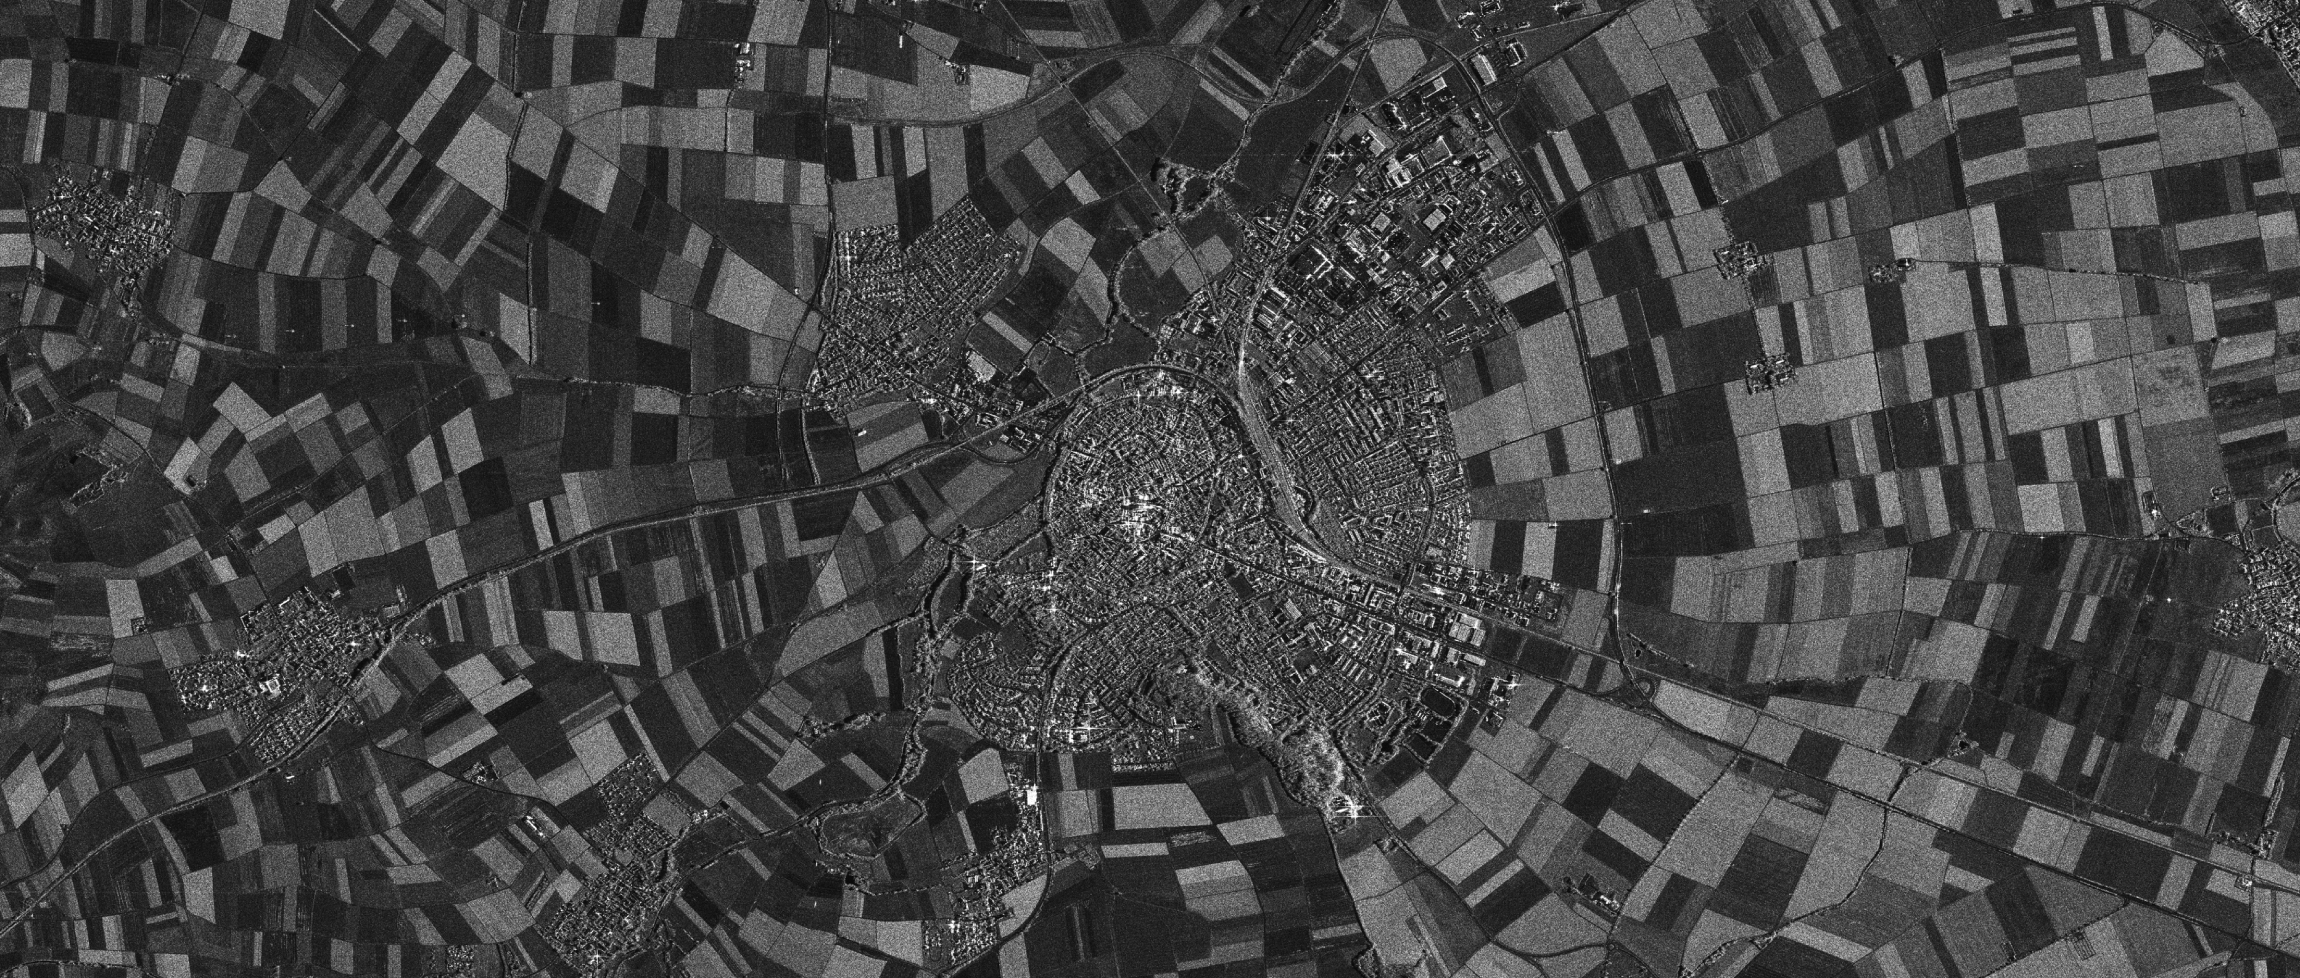 Synthetic Aperture Radar (SAR) satellite imagery of Nördlingen, Germany. Image taken by the TerraSAR-X satellite (1-m resolution) operated by DLR, 2007. Source: Wikimedia.